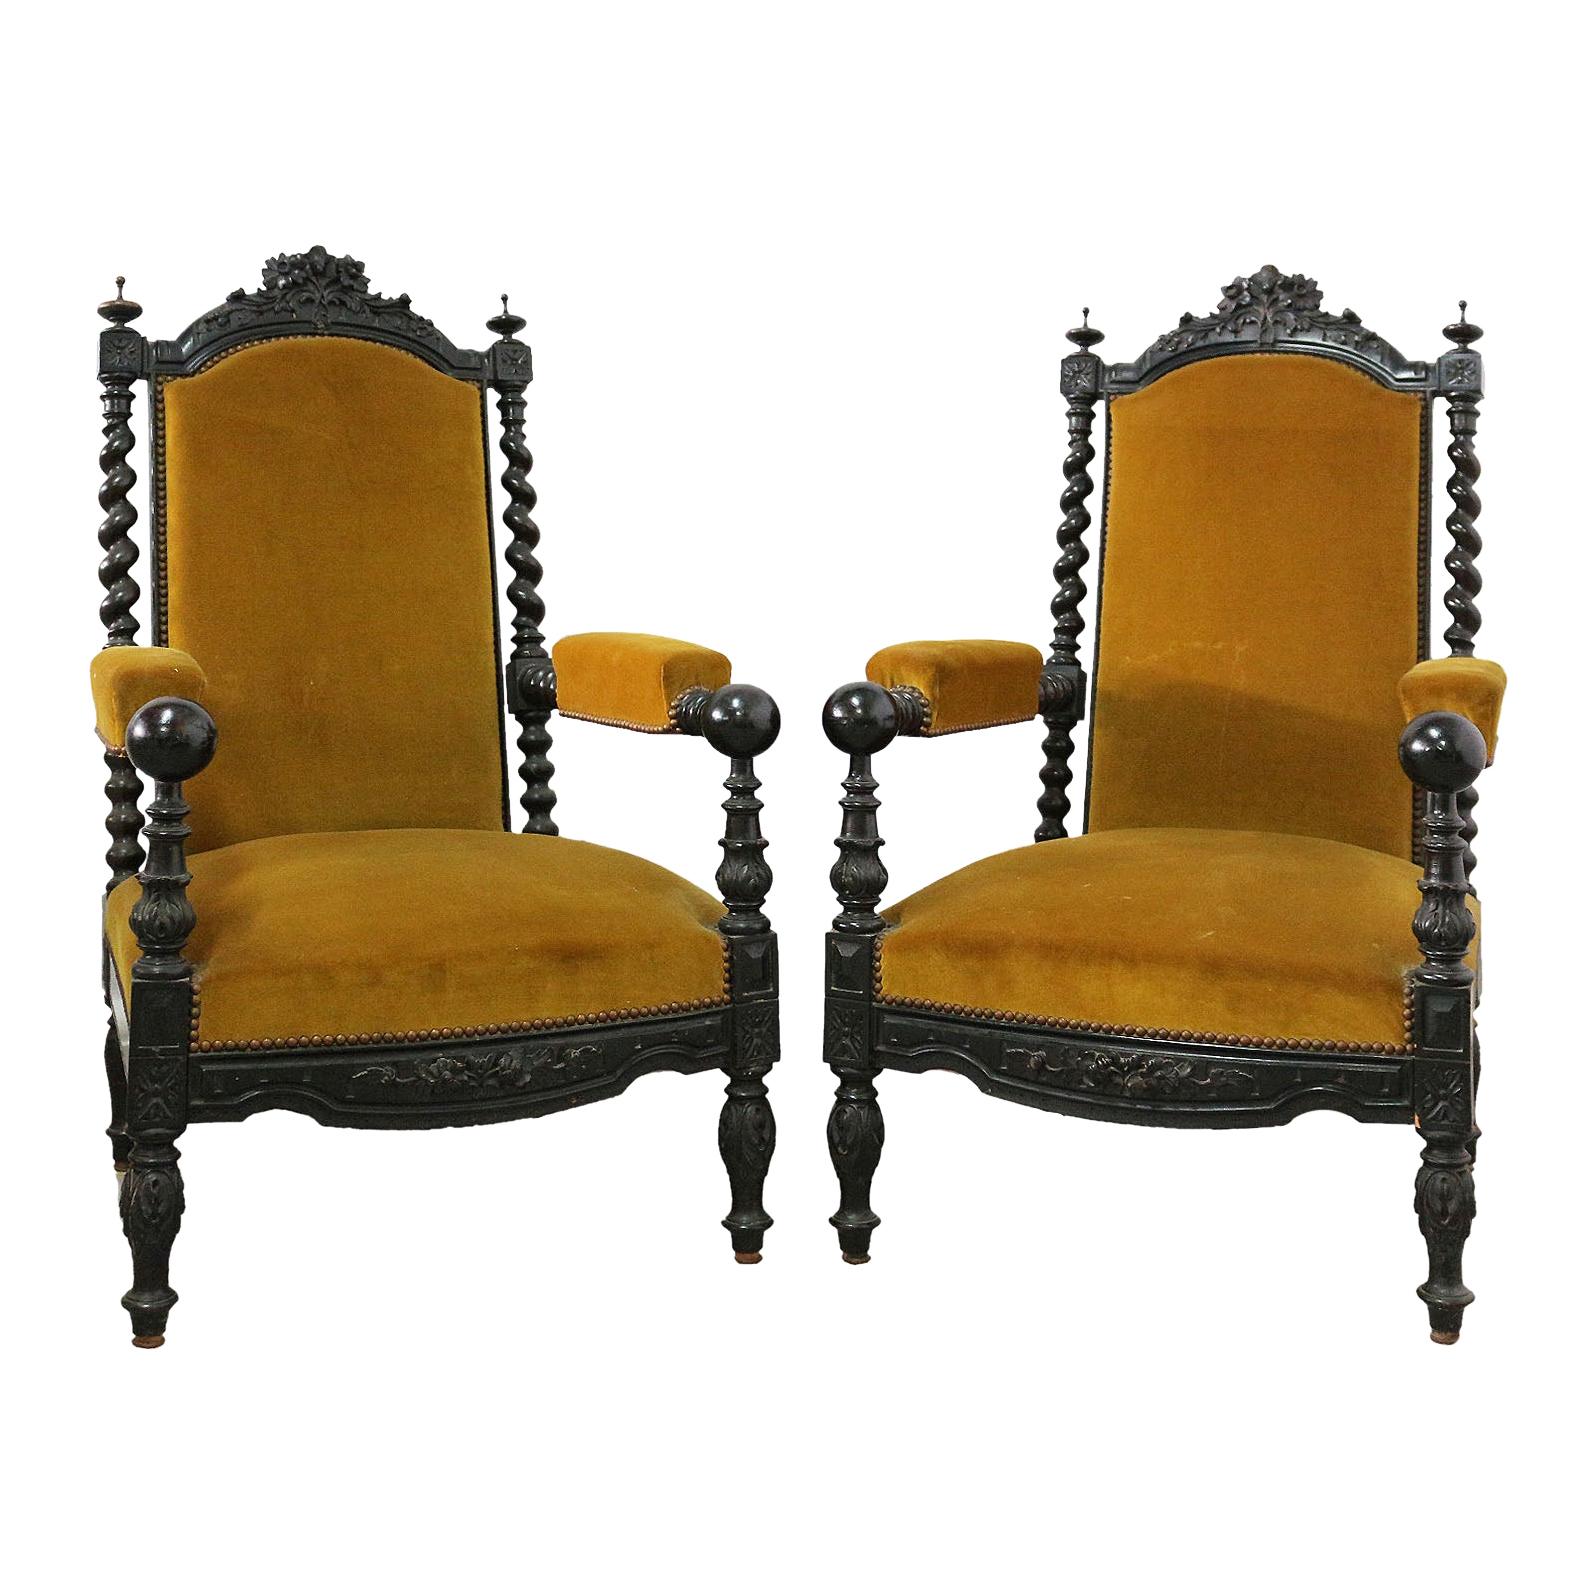 Pair of Throne Chairs Open Armchairs French 19th Century Louis XIII Barley Twist